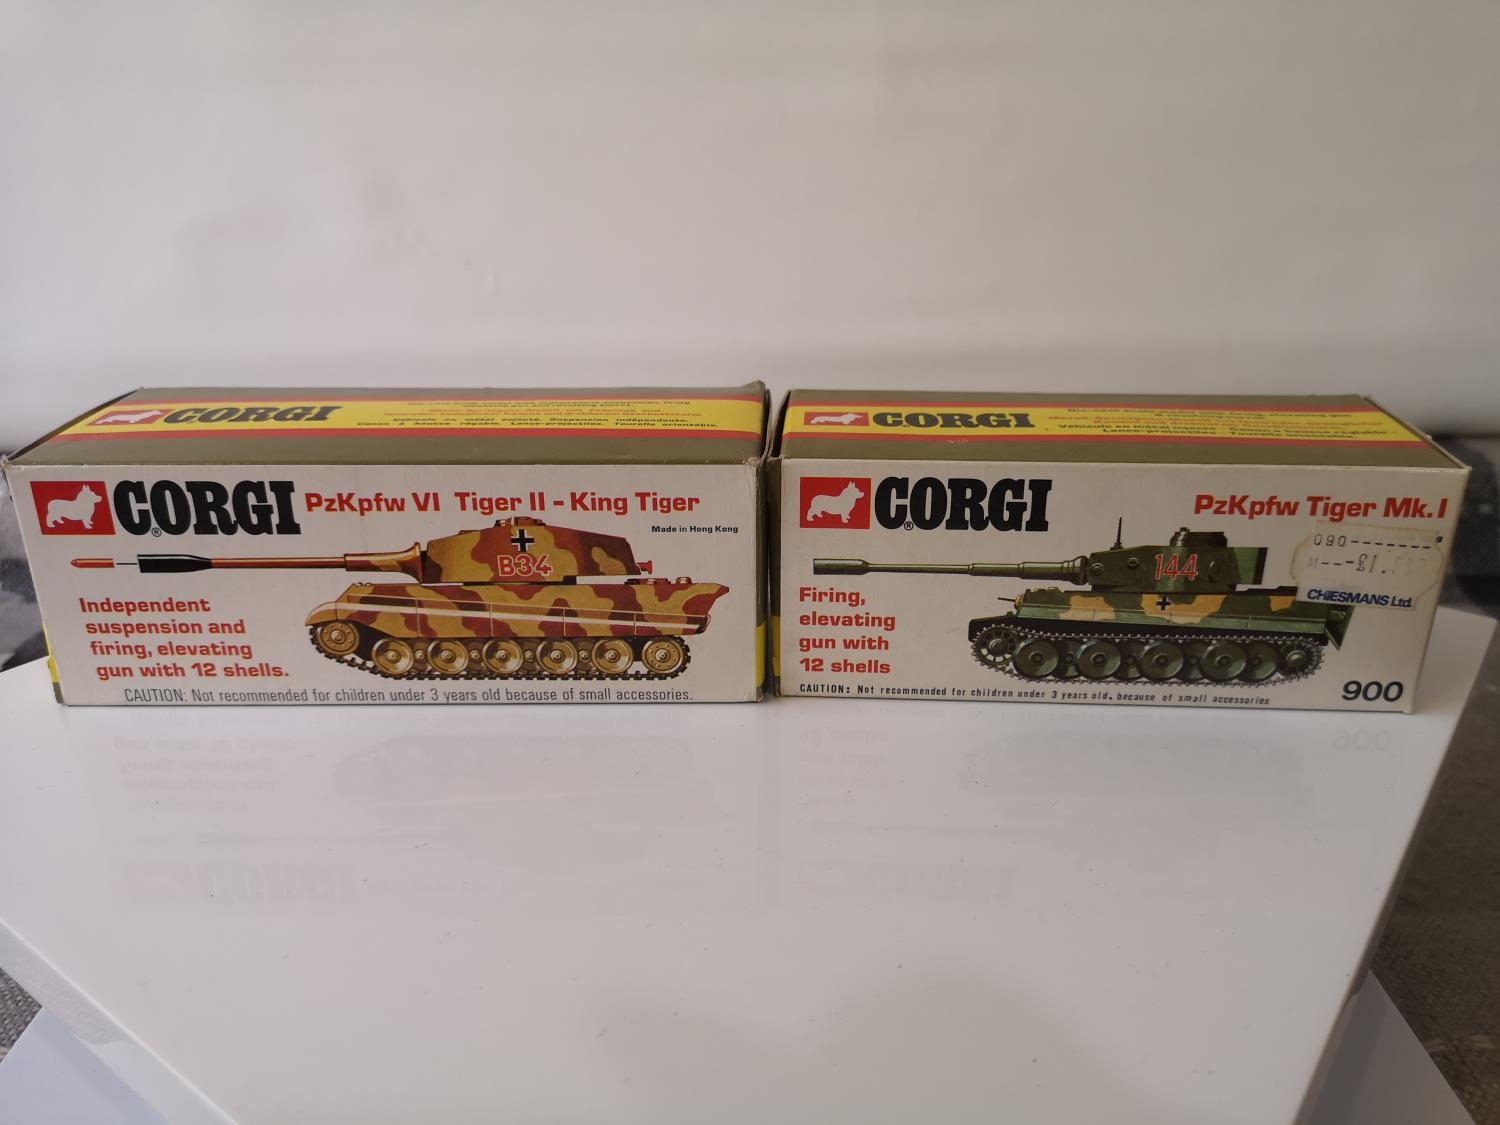 TWO CORGI MILITARY MODELS WITH BOXES. 900 PZKPFW TIGER MKI & 904 KING TIGER TANK. - Image 2 of 2